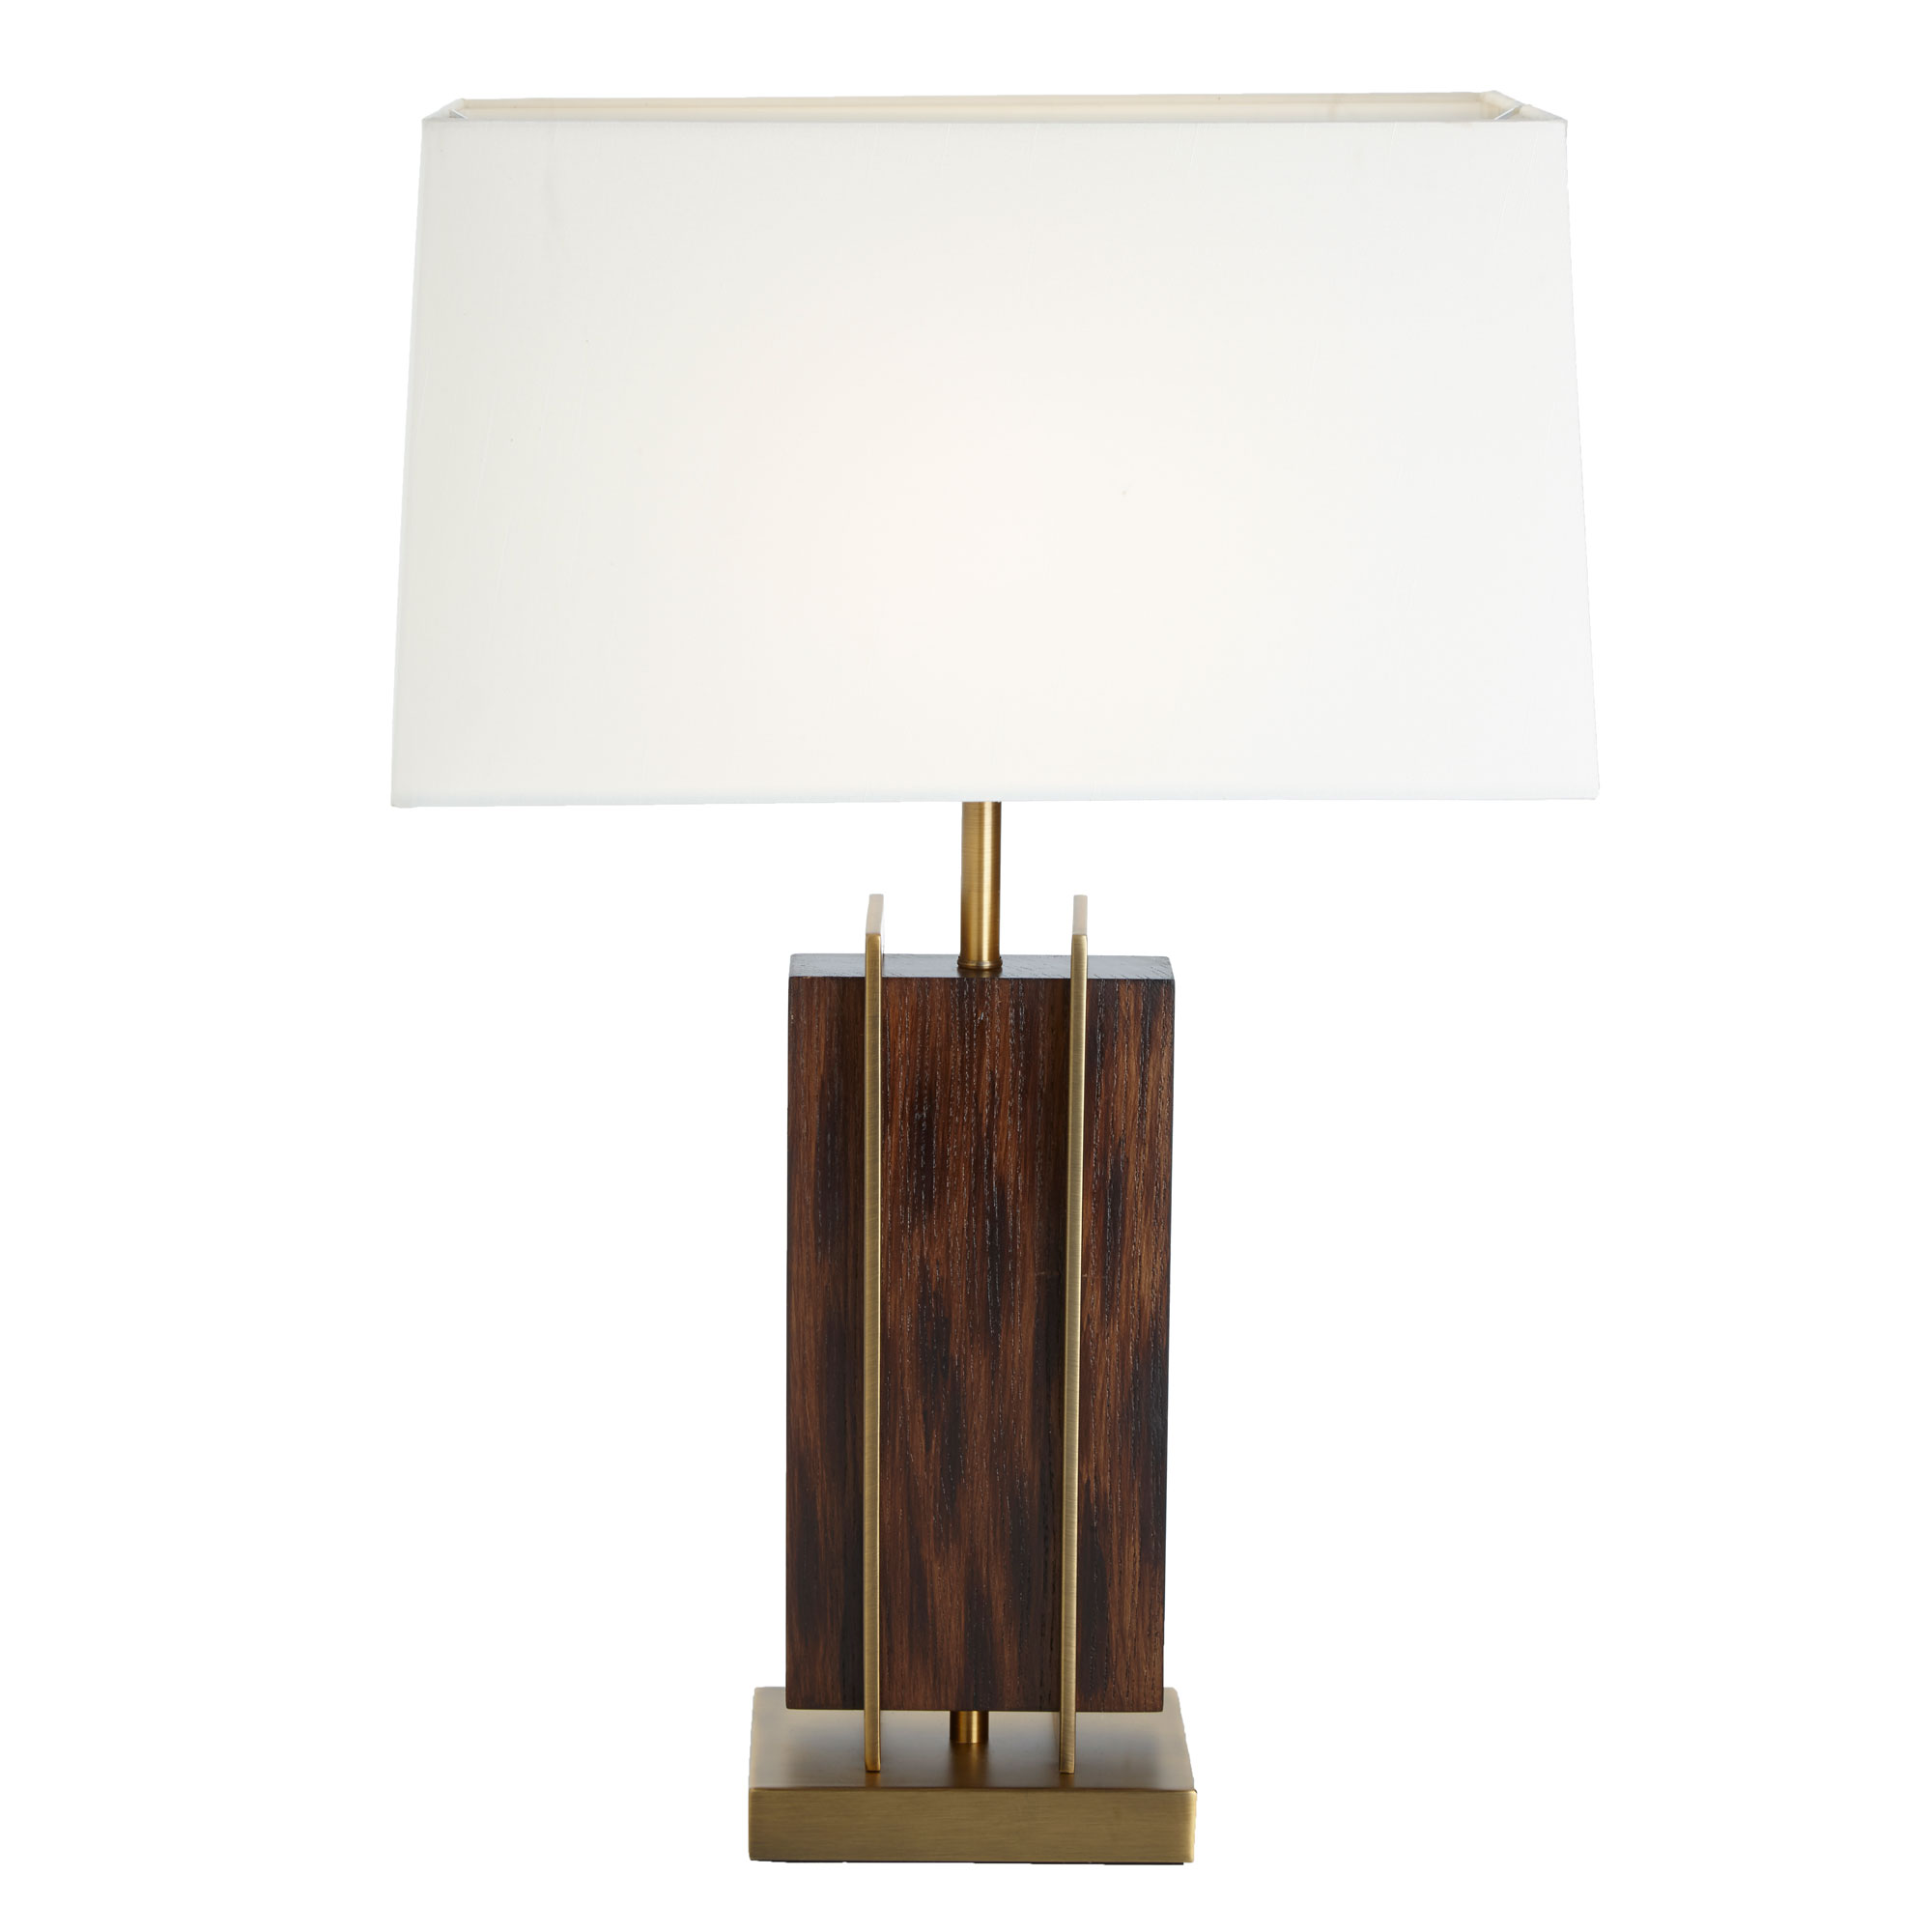 Parcent Table Lamp wood and rosewood vaneered lamp